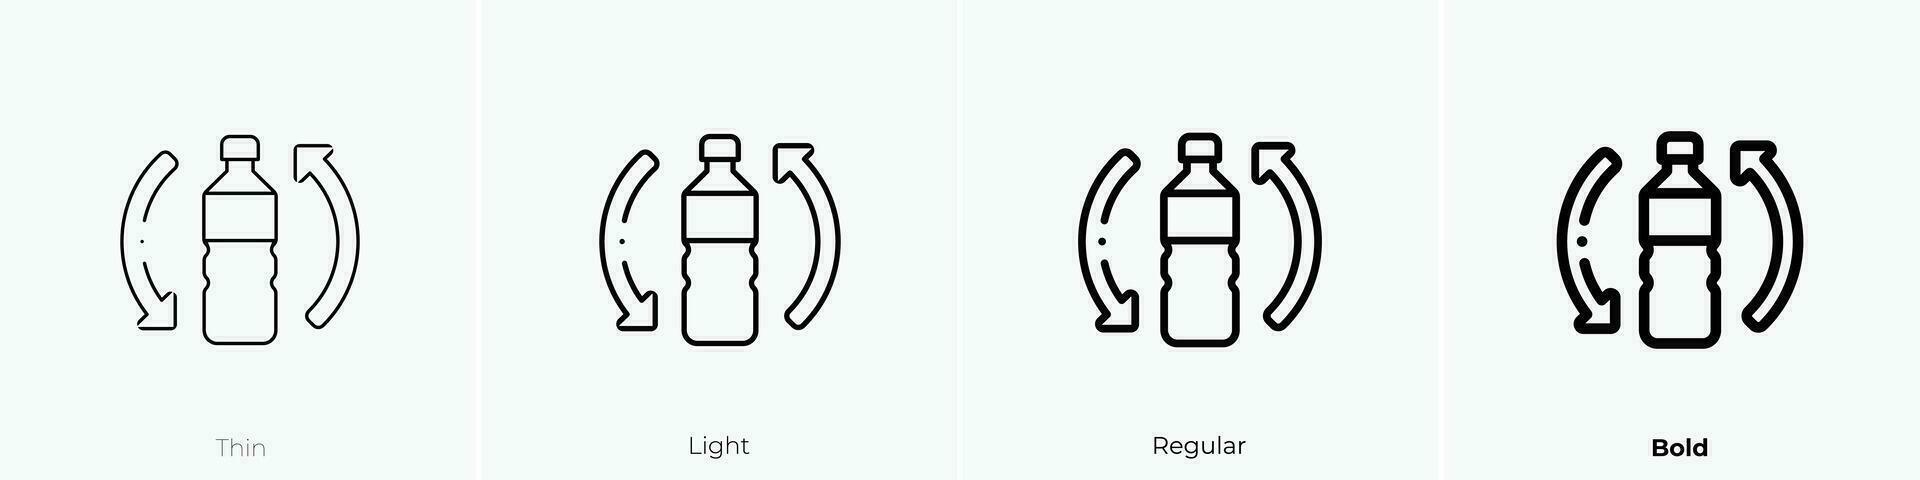 plastic bottle icon. Thin, Light, Regular And Bold style design isolated on white background vector